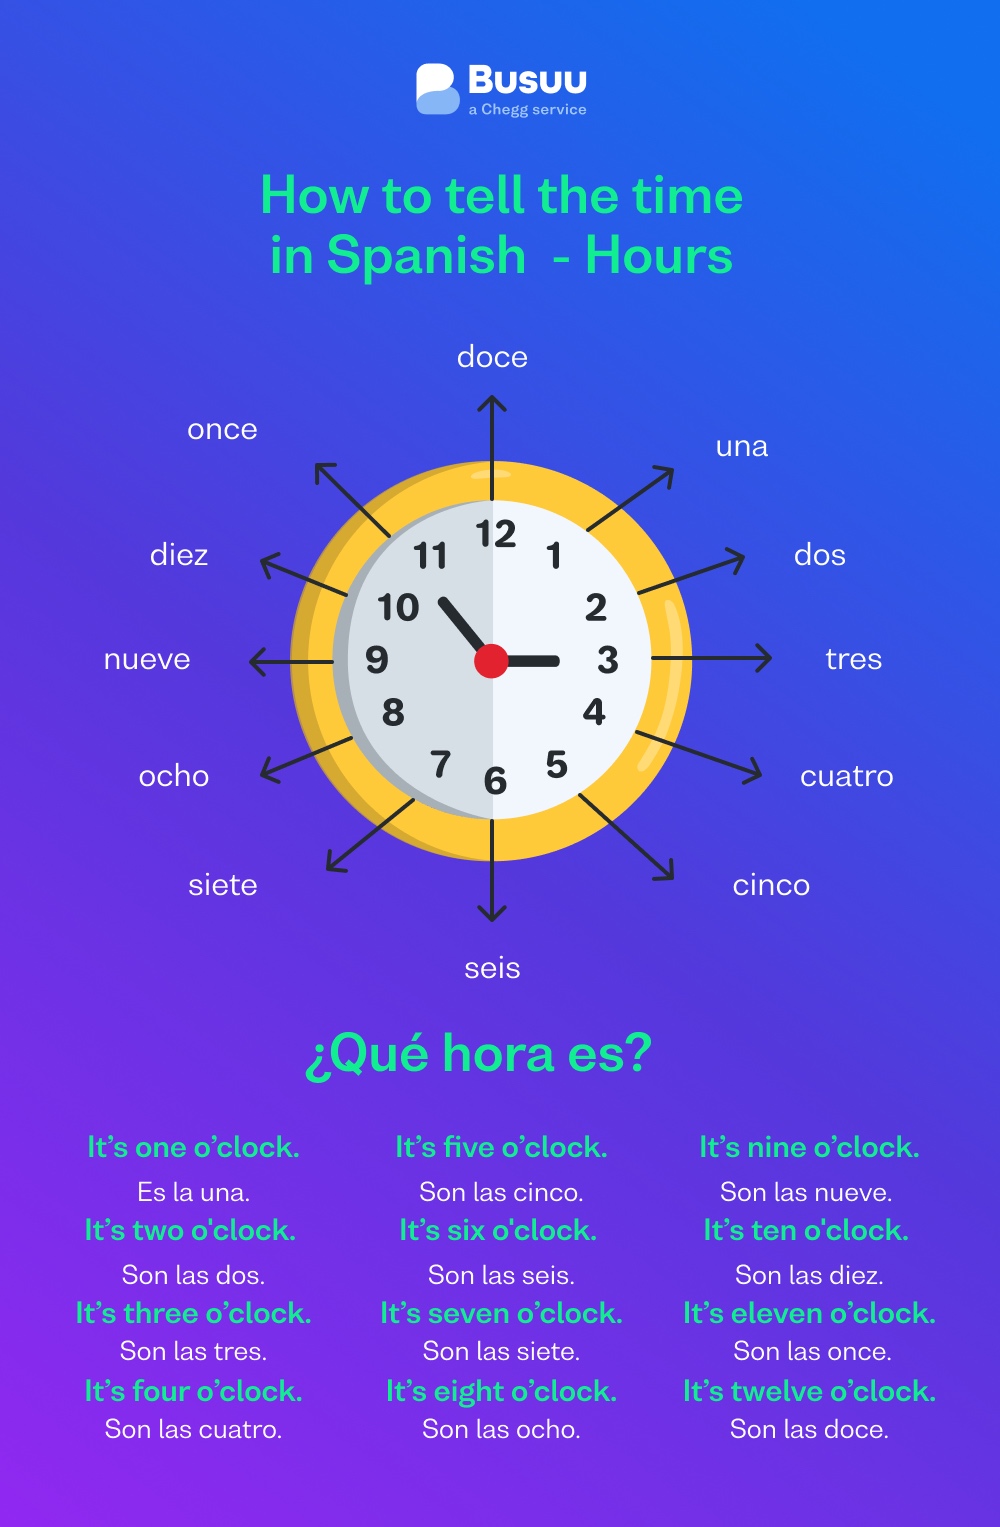 time-in-spanish-complete-guide-to-telling-the-time-busuu